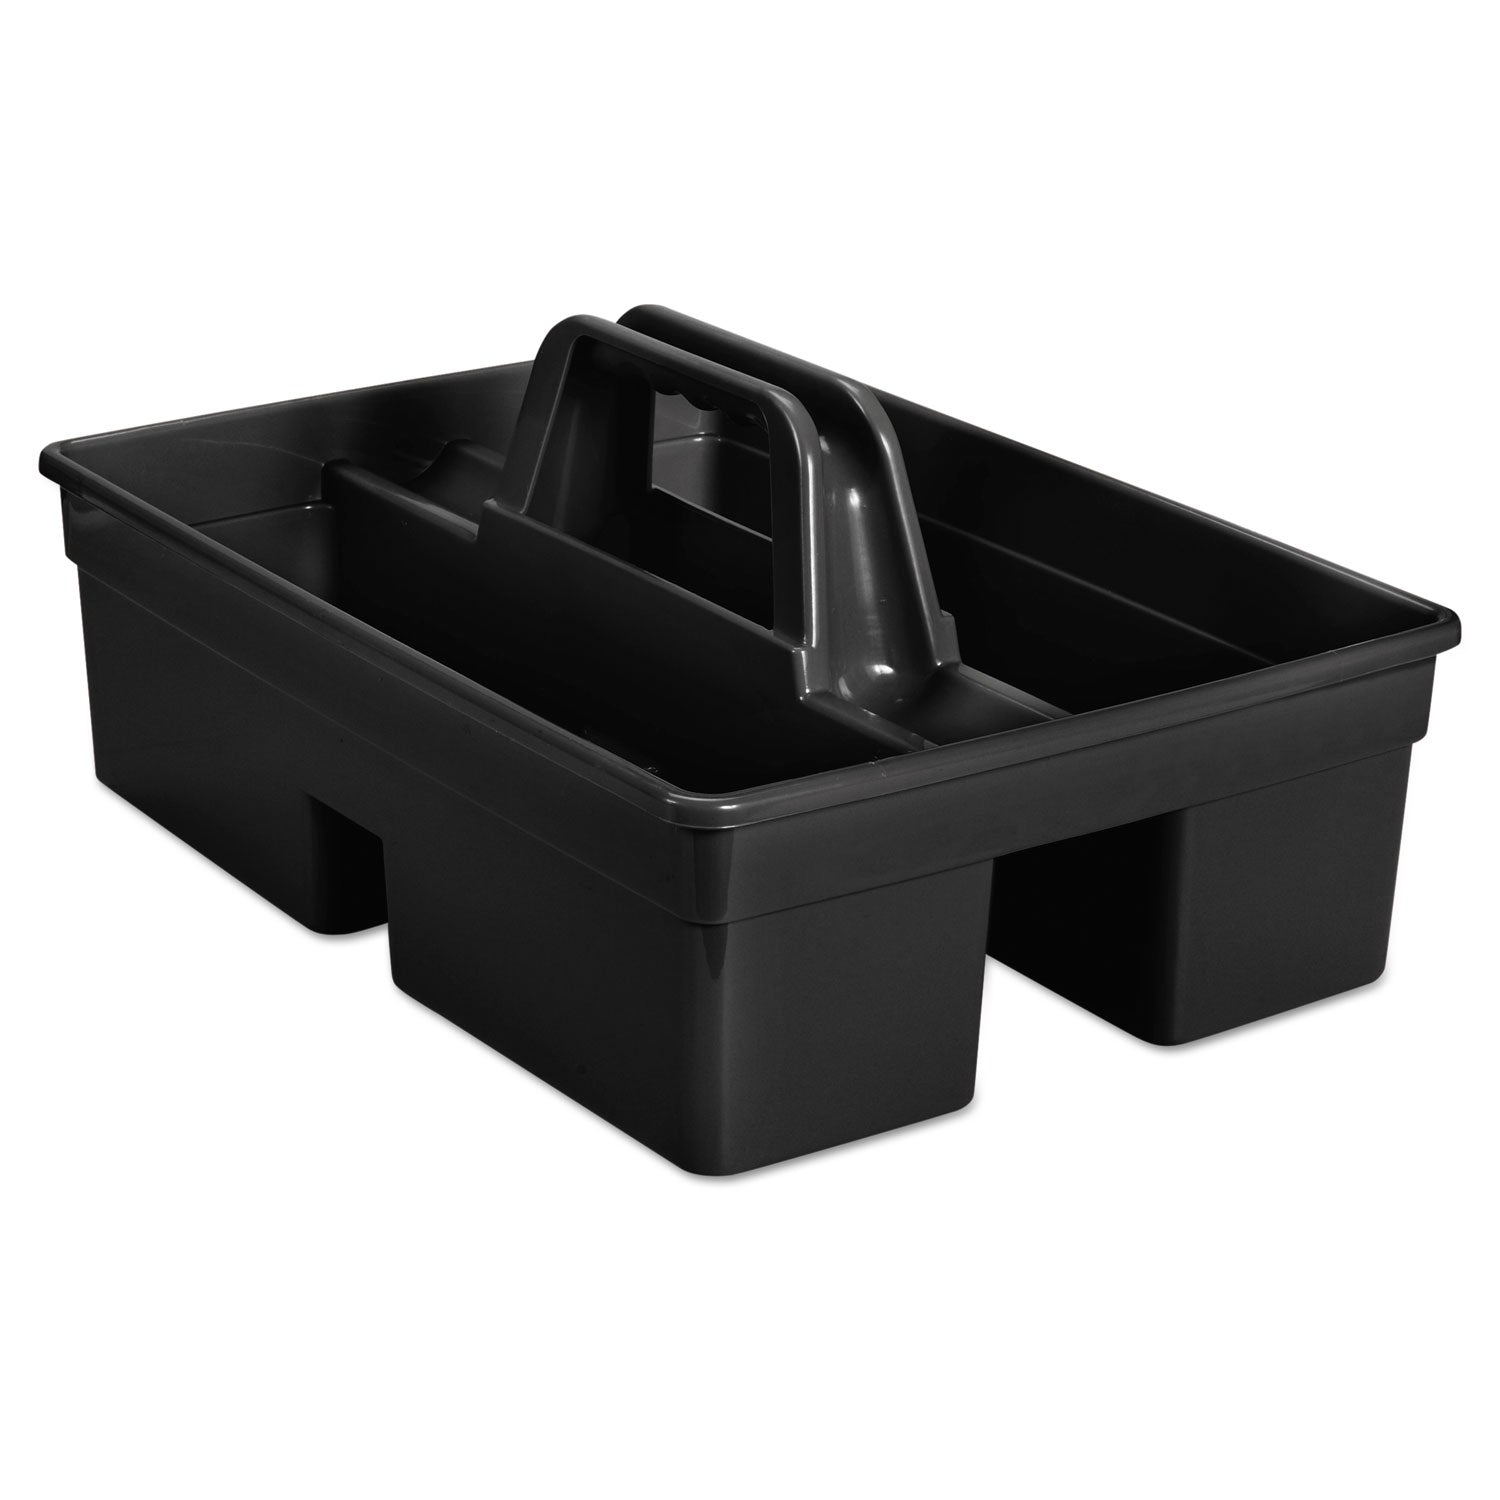 executive-carry-caddy-two-compartments-plastic-1075-x-65-black_rcp1880994 - 1